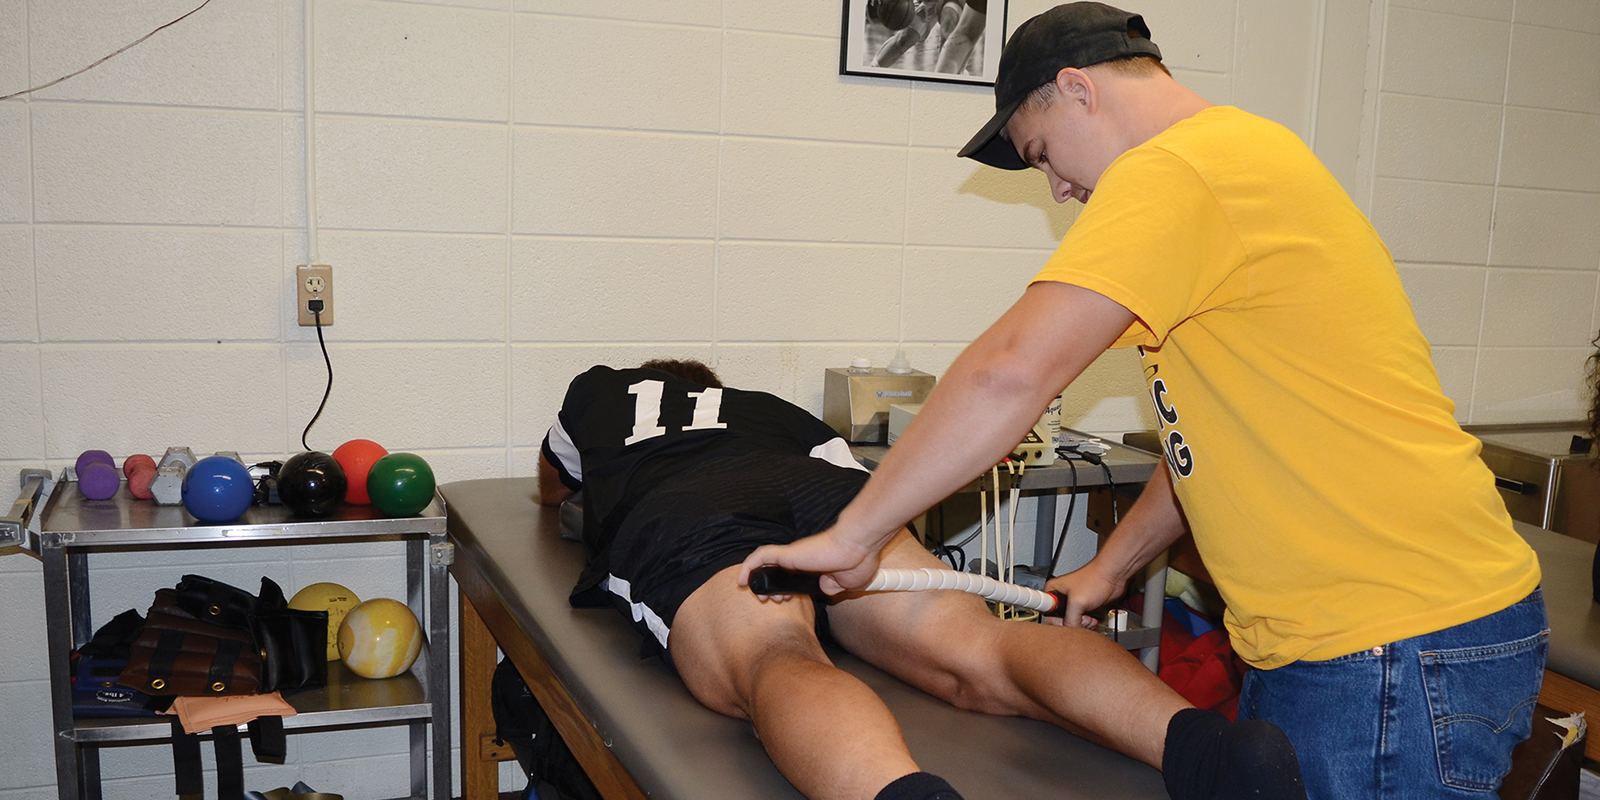 A student athletic trainer treating an athlete.